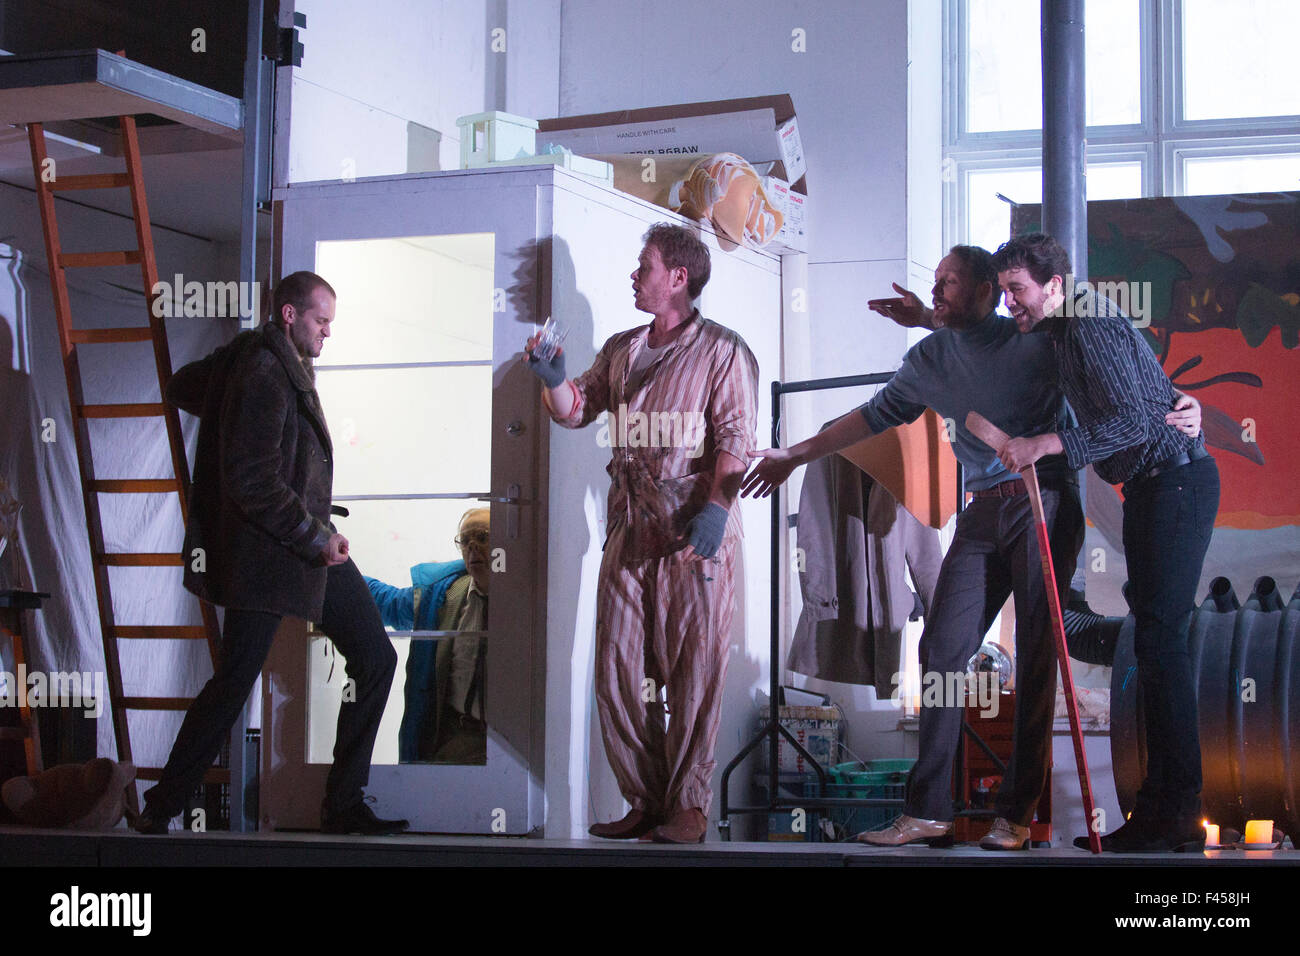 London, UK. 14/10/2015. L-R: Nicholas Masters as Colline, Simon Butteriss as Benoit, Duncan Rock as Marcello, Ashley Riches as Schaunard and Zach Borichevsky as Rodolfo. Dress rehearsal of the Giacomo Puccini opera La Boheme directed by Benedict Andrews at the London Coliseum. Conducted by Xian Zhang. Cast: Corinne Winters as Mimi, Zach Borichevsky as Rodolfo, Duncan Rock as Marcello and Rhian Lois as Musetta. Stock Photo